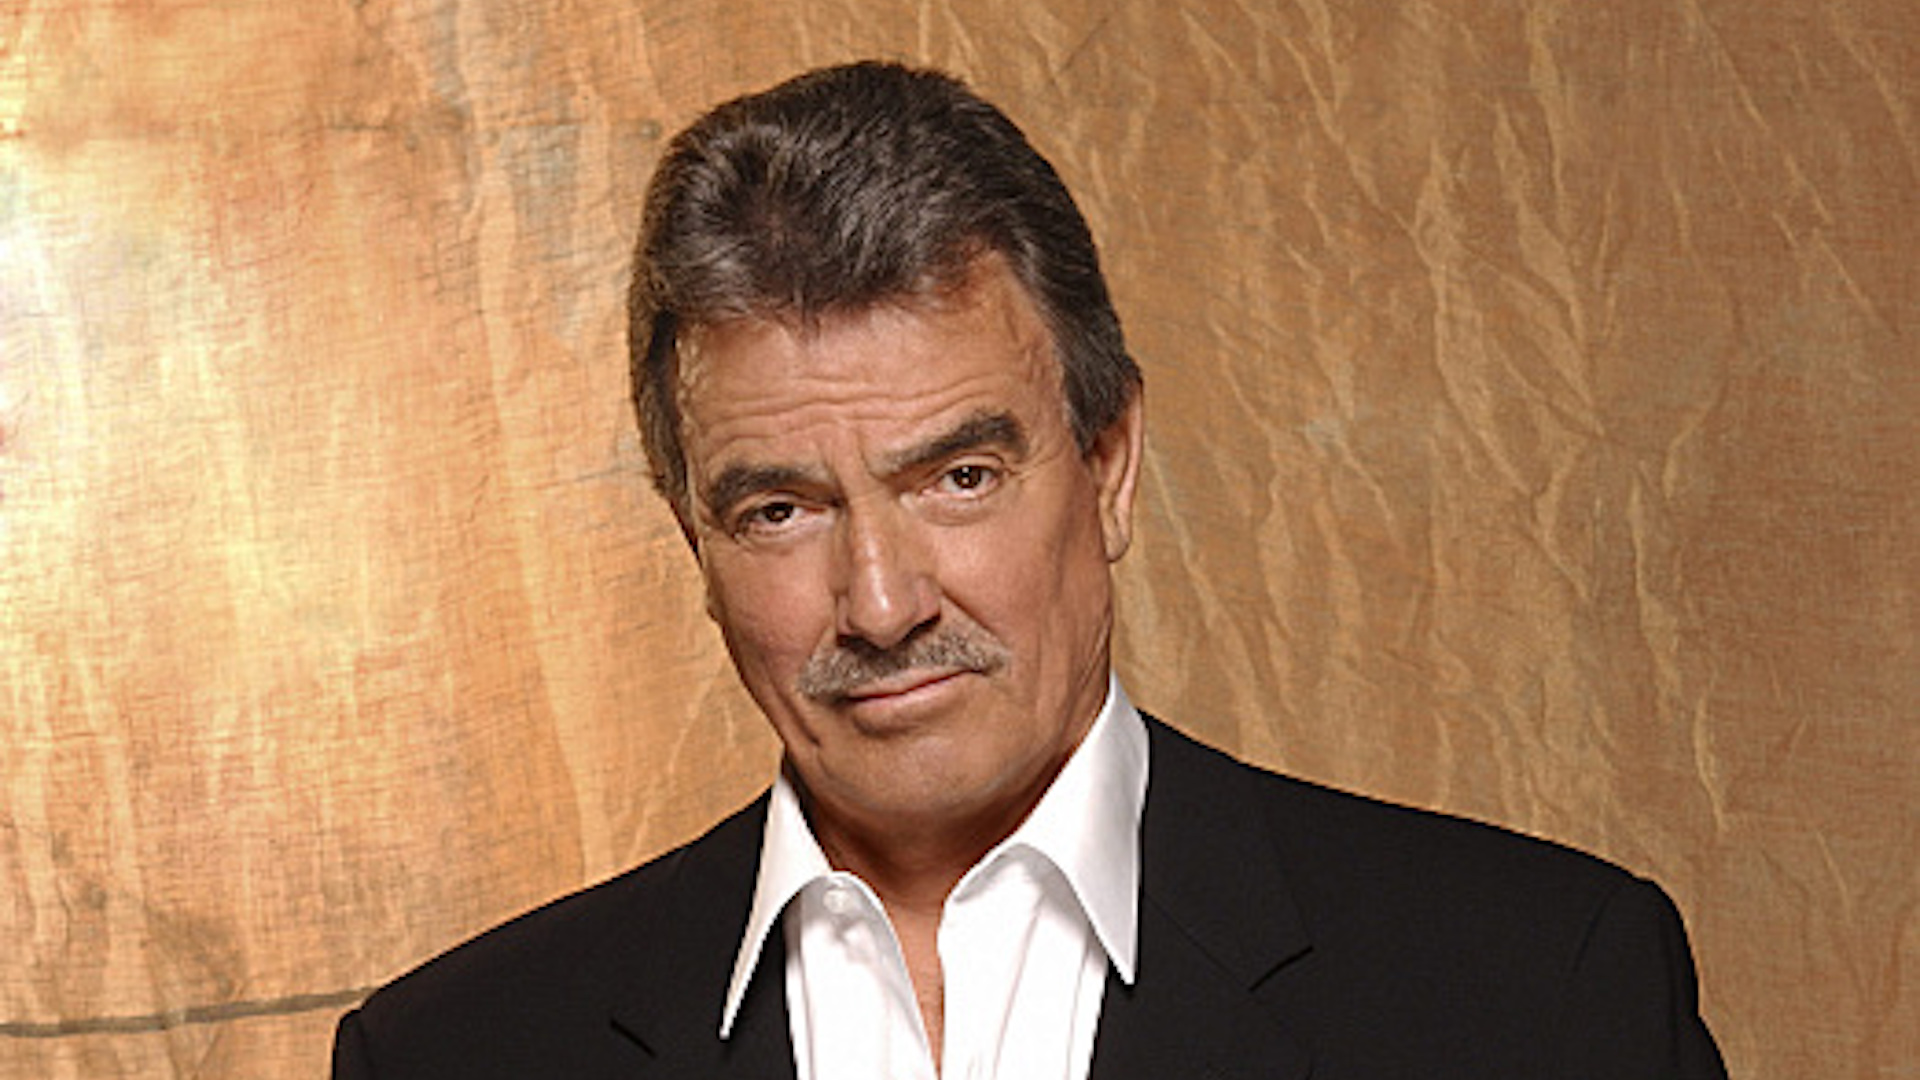 Eric Braeden from The Young and the Restless